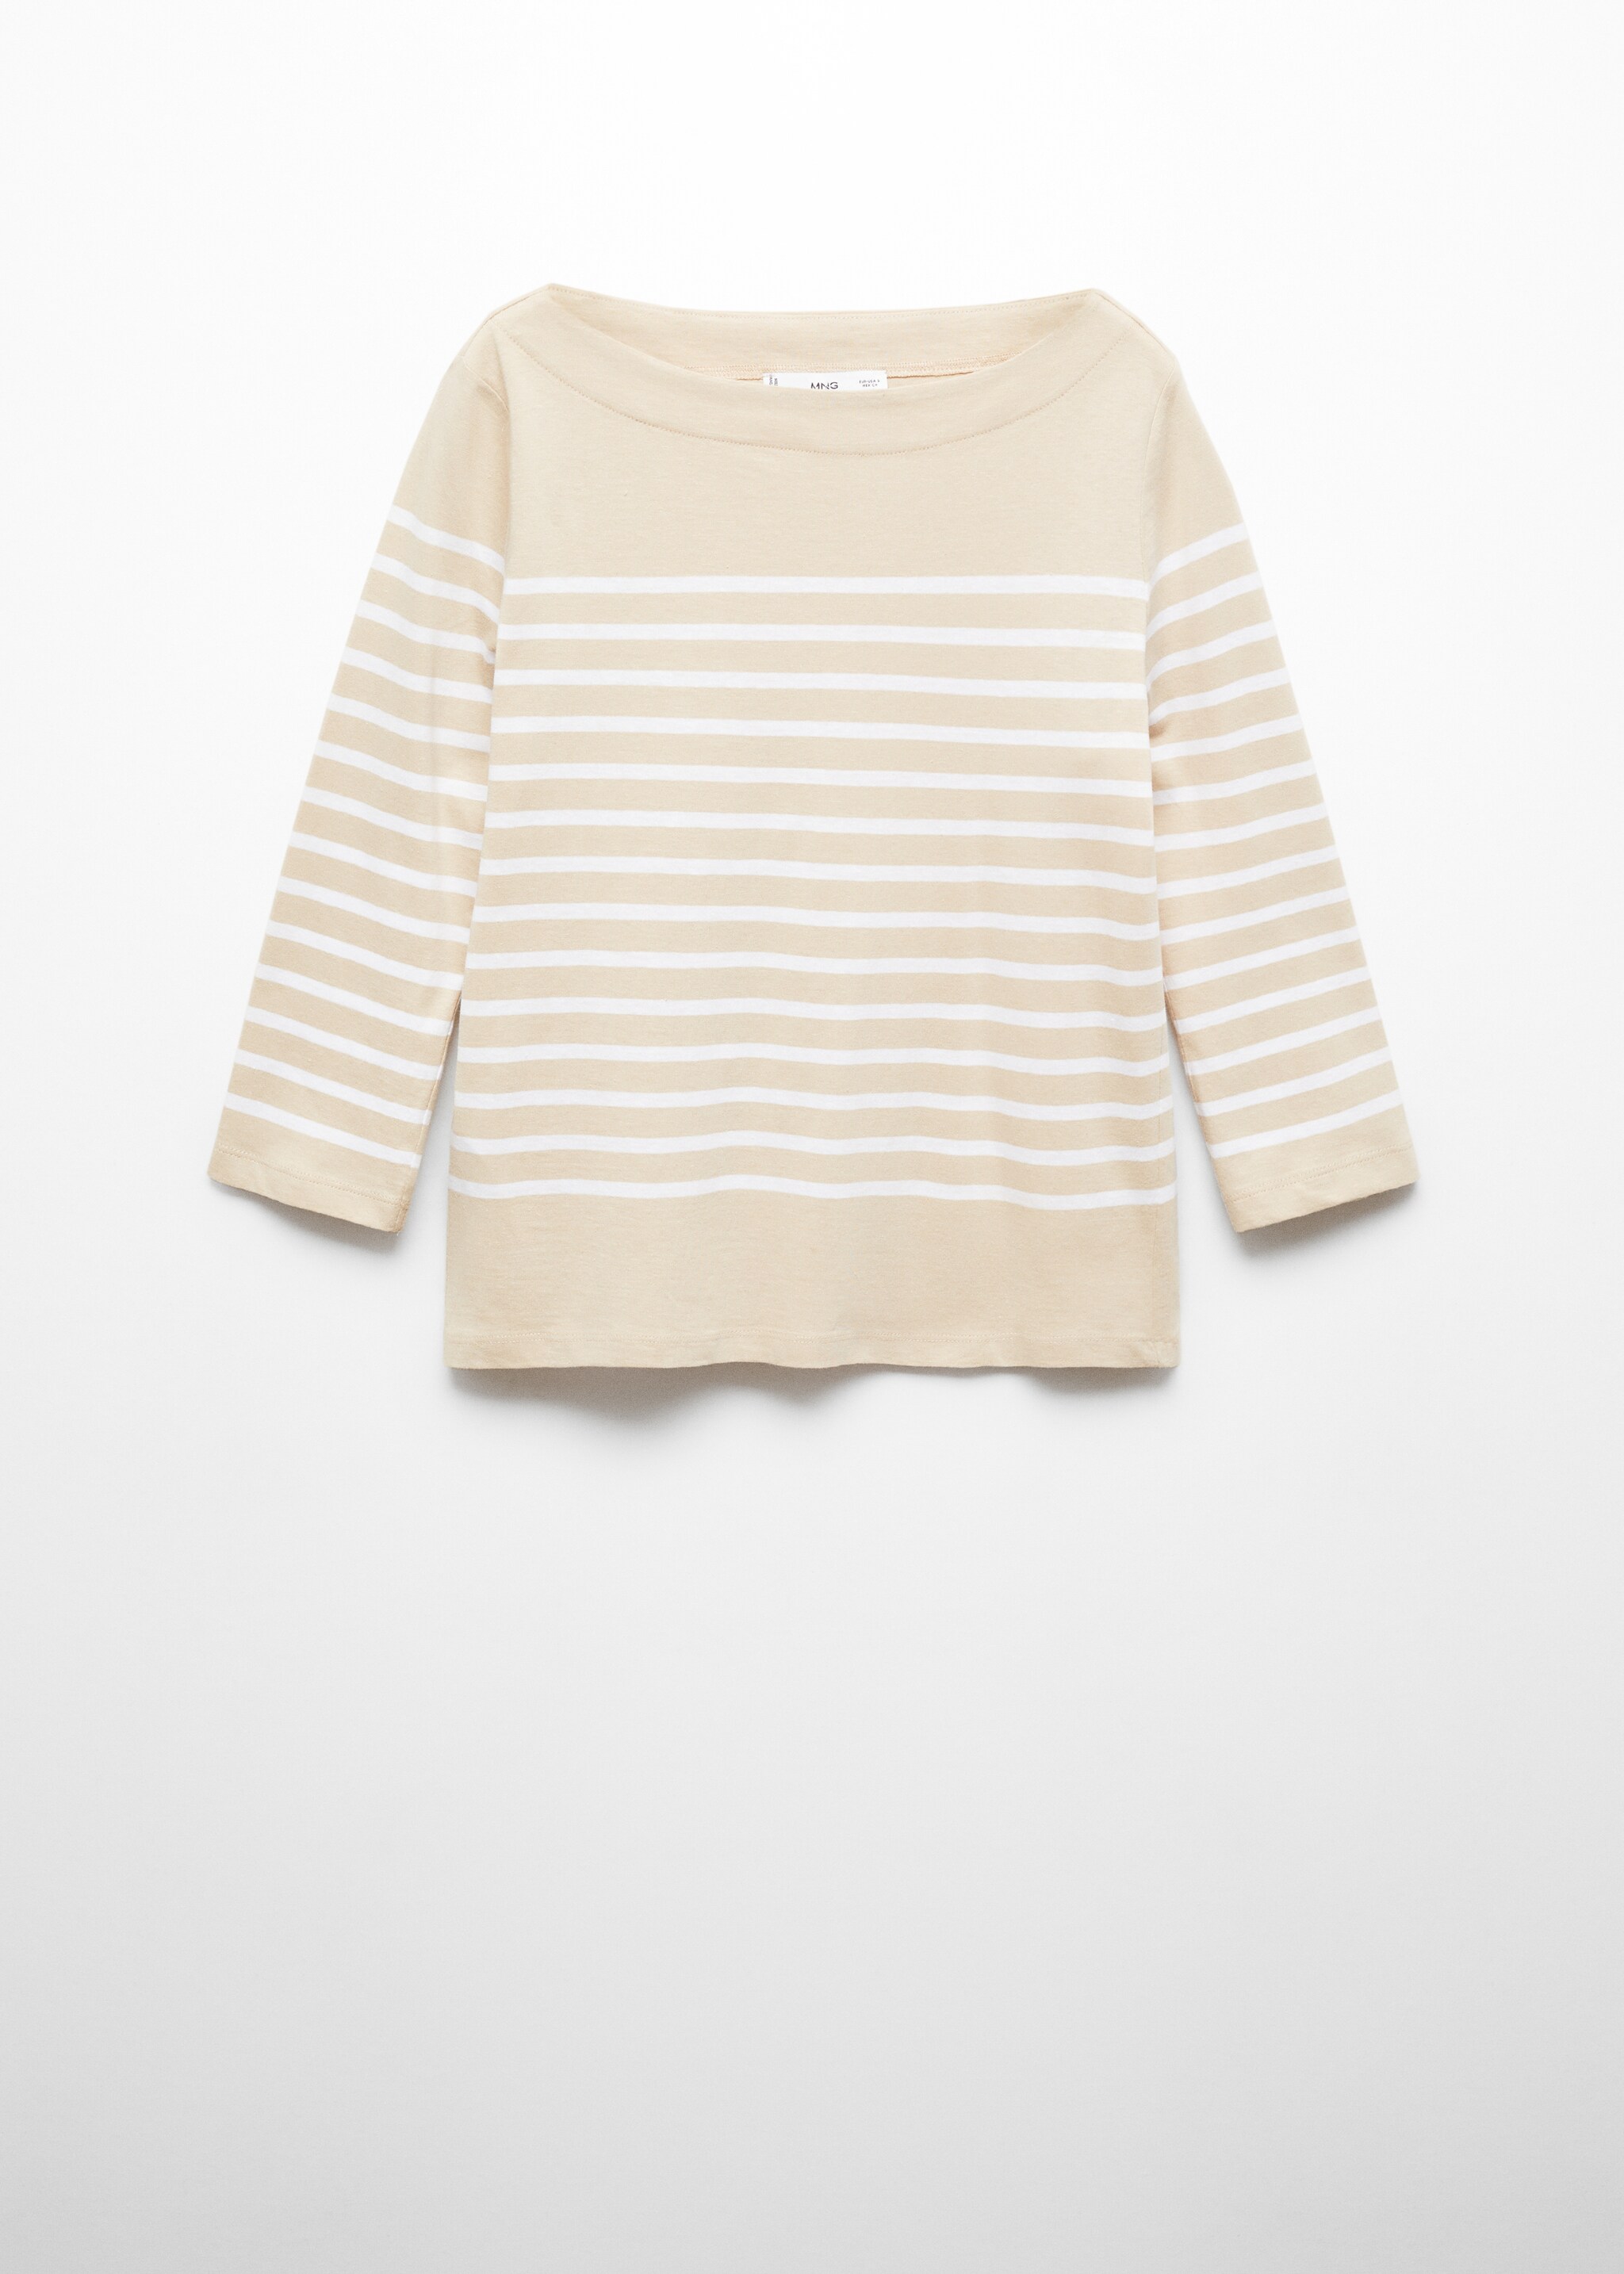 Striped boat-neck t-shirt - Article without model